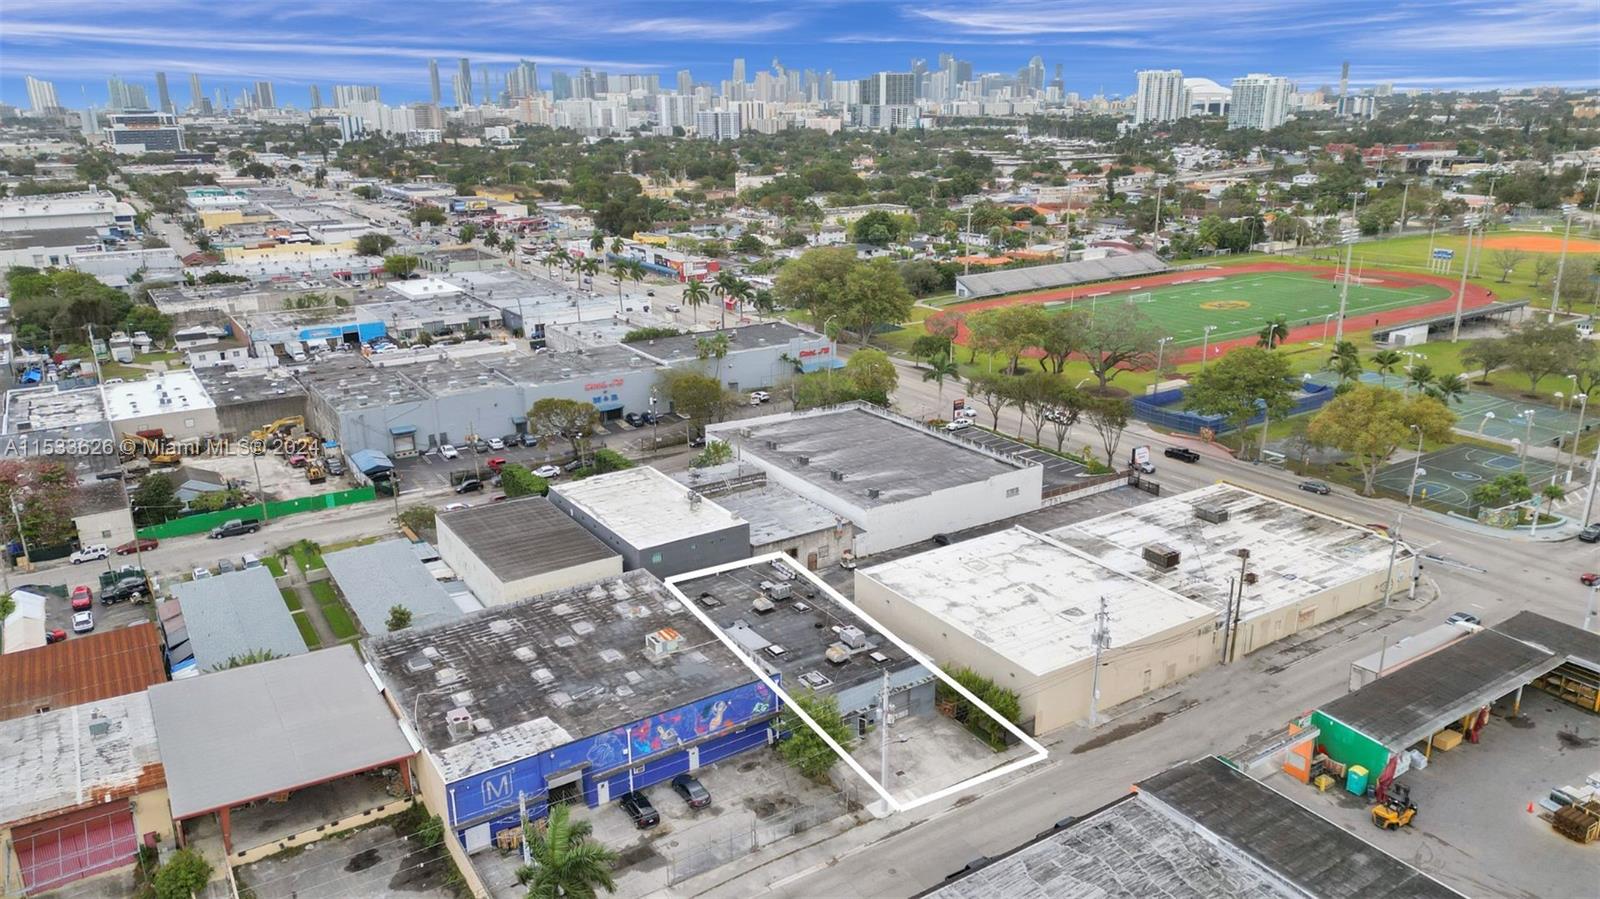 Completely remodeled freestanding warehouse in the Garment District near the Miami River. This 5000 sqft space serves as warehouse/retail/office, featuring a reception that opens to 6 private offices with glass enclosures for privacy. It includes a full kitchen, 2 large ADA-compliant bathrooms, new roof, and full A/C coverage. Office space totals approx. 800 sqft, and warehouse space about 4200 sqft. Equipped with impact windows/doors, advanced security with cameras, 18+ ft ceiling height, a white screen area for content creation, an employee lounge, 12 parking spaces plus ample street parking, proximity to MIA, Port of MIA, Wynwood, and Brickell enhances its investment appeal. Also available for lease; contact L/A.